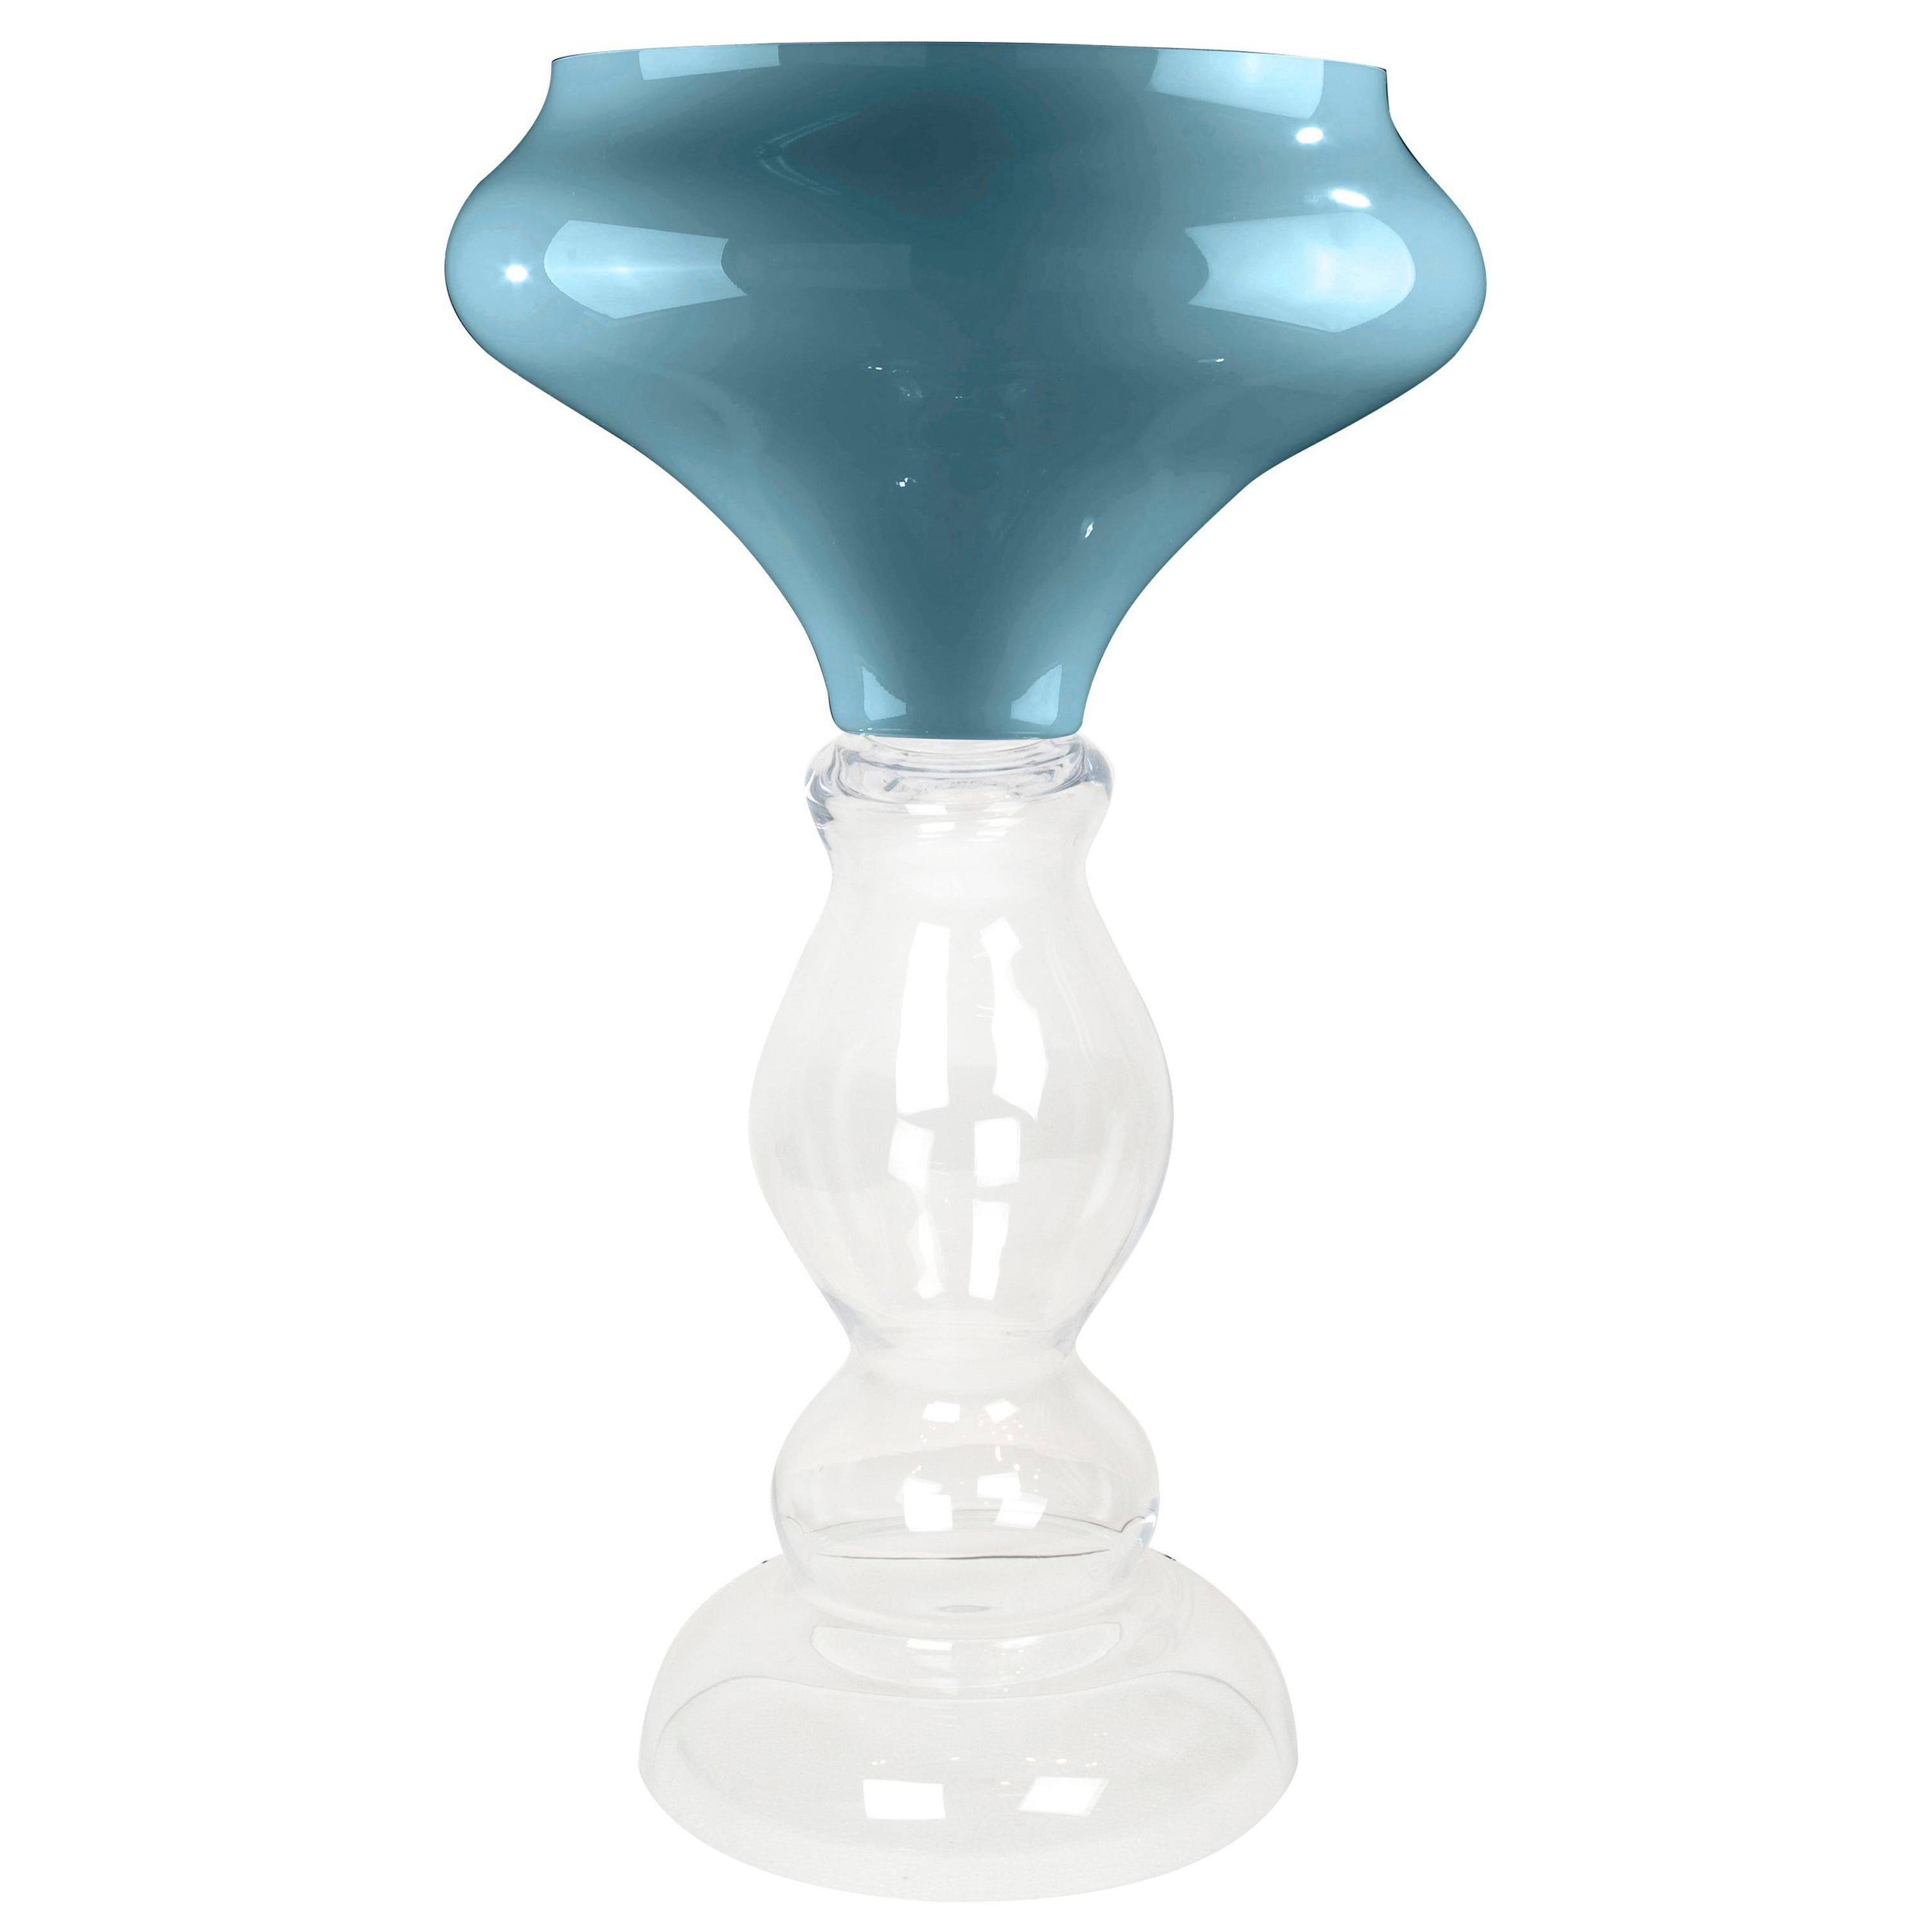 Vase Zeus, Purist Blue, 2020 Trend, and Clear Color, in Glass, Italy